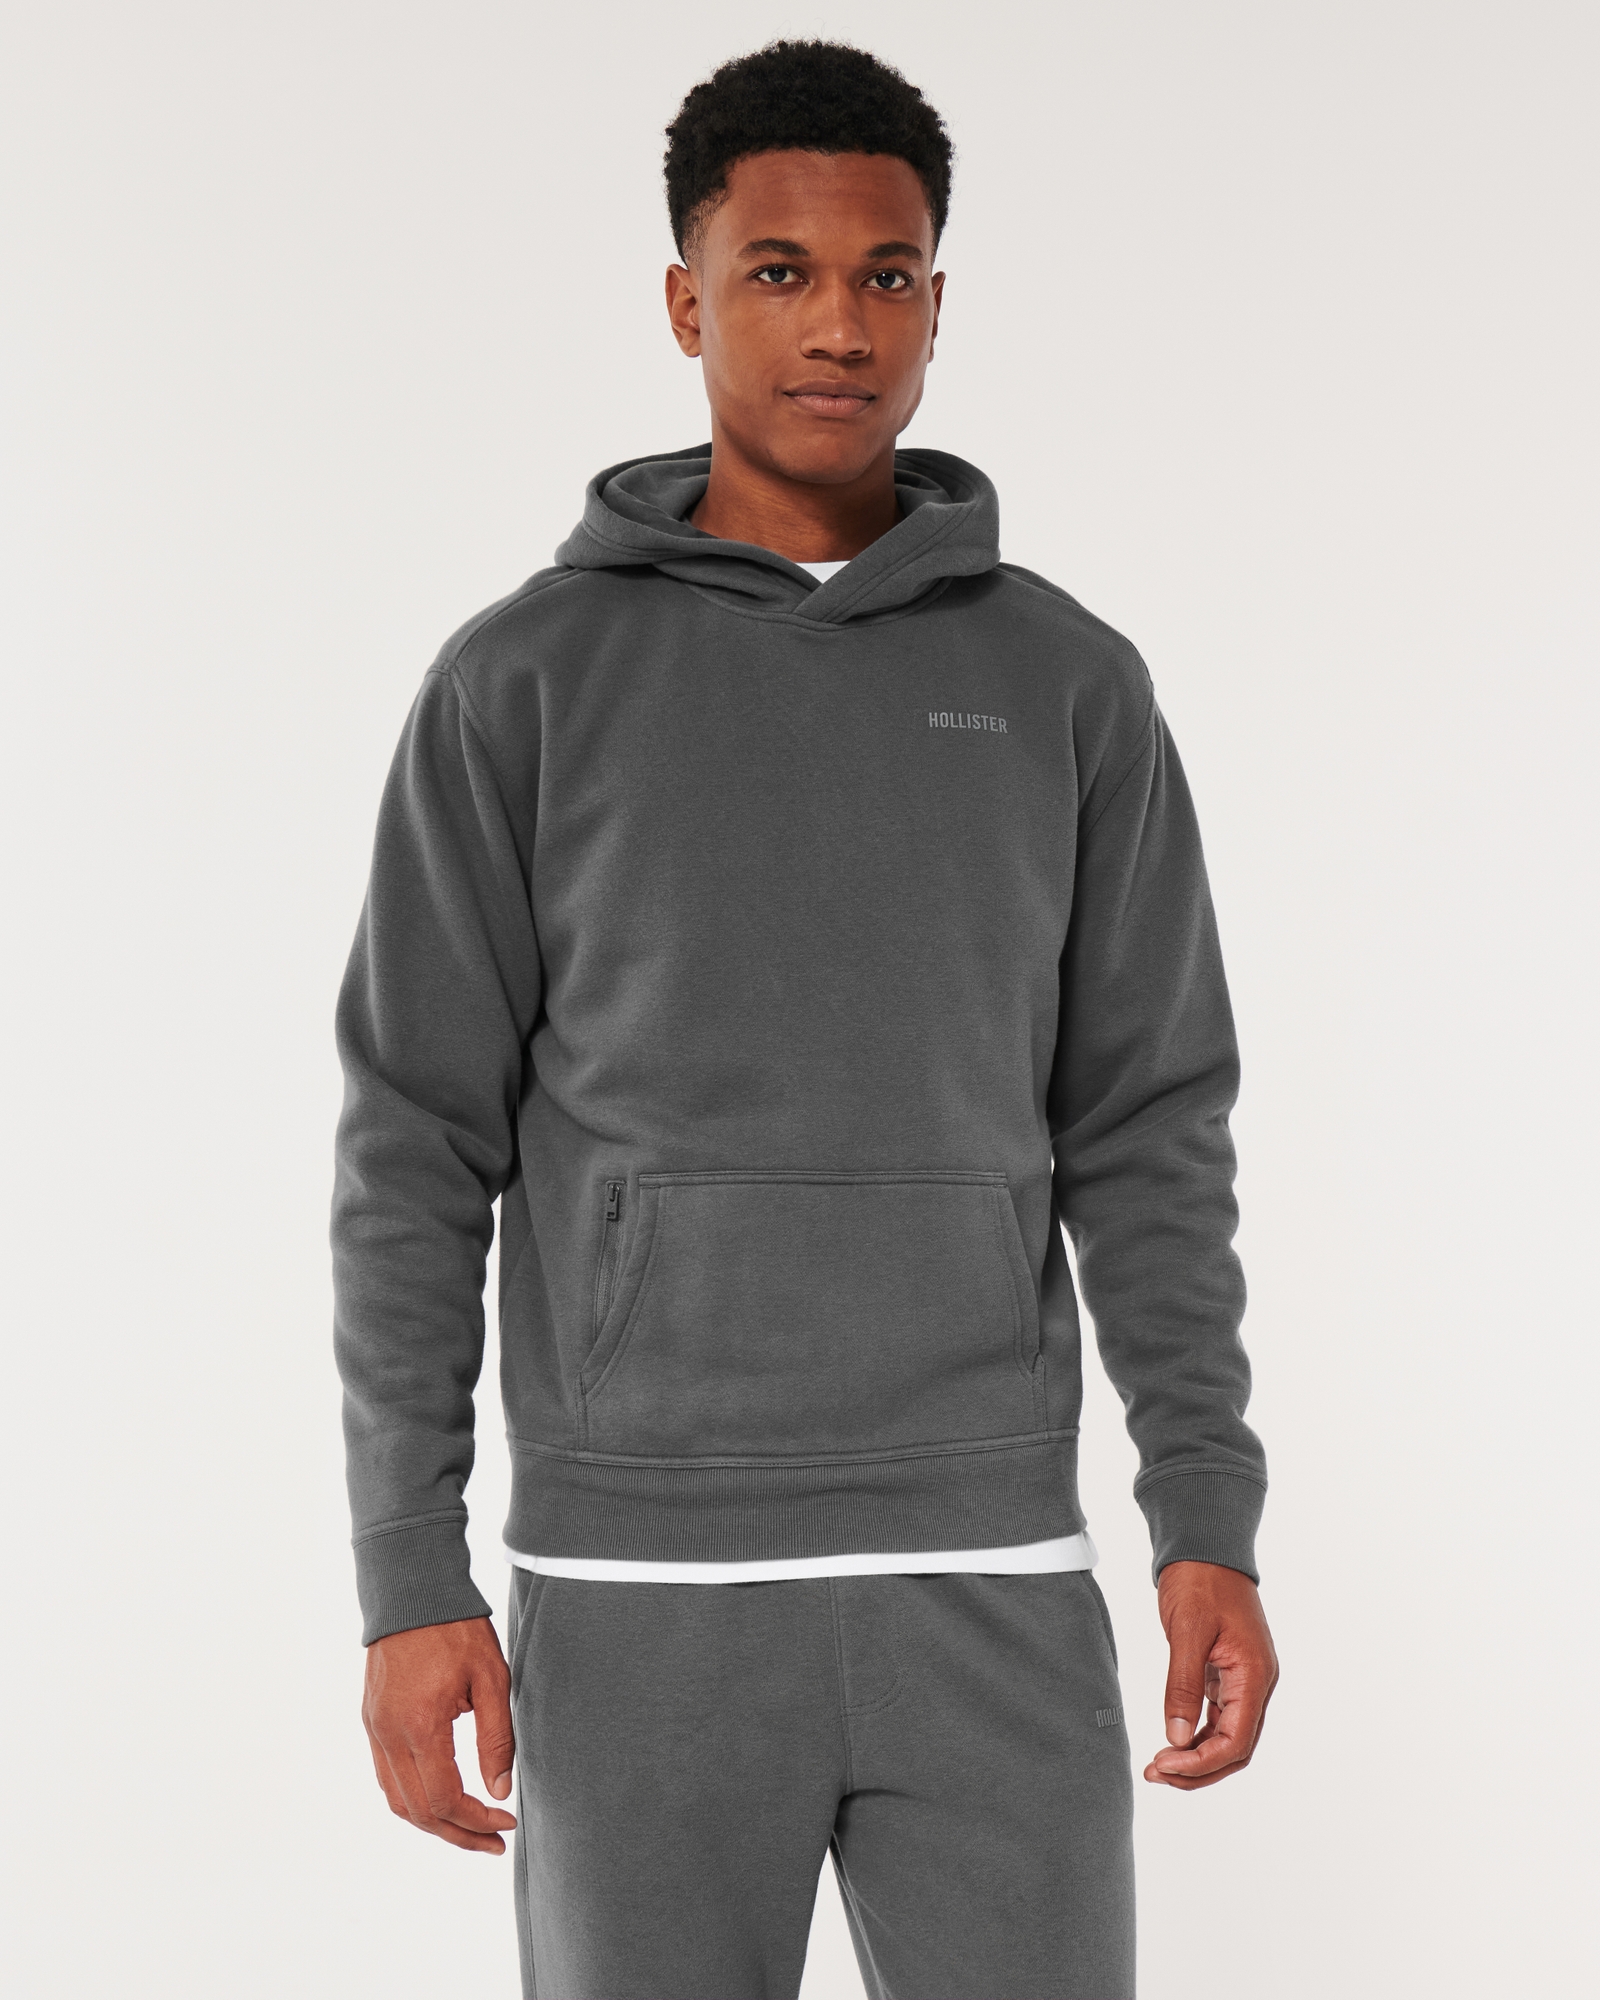 https://img.hollisterco.com/is/image/anf/KIC_322-3160-1677-120_model1.jpg?policy=product-extra-large